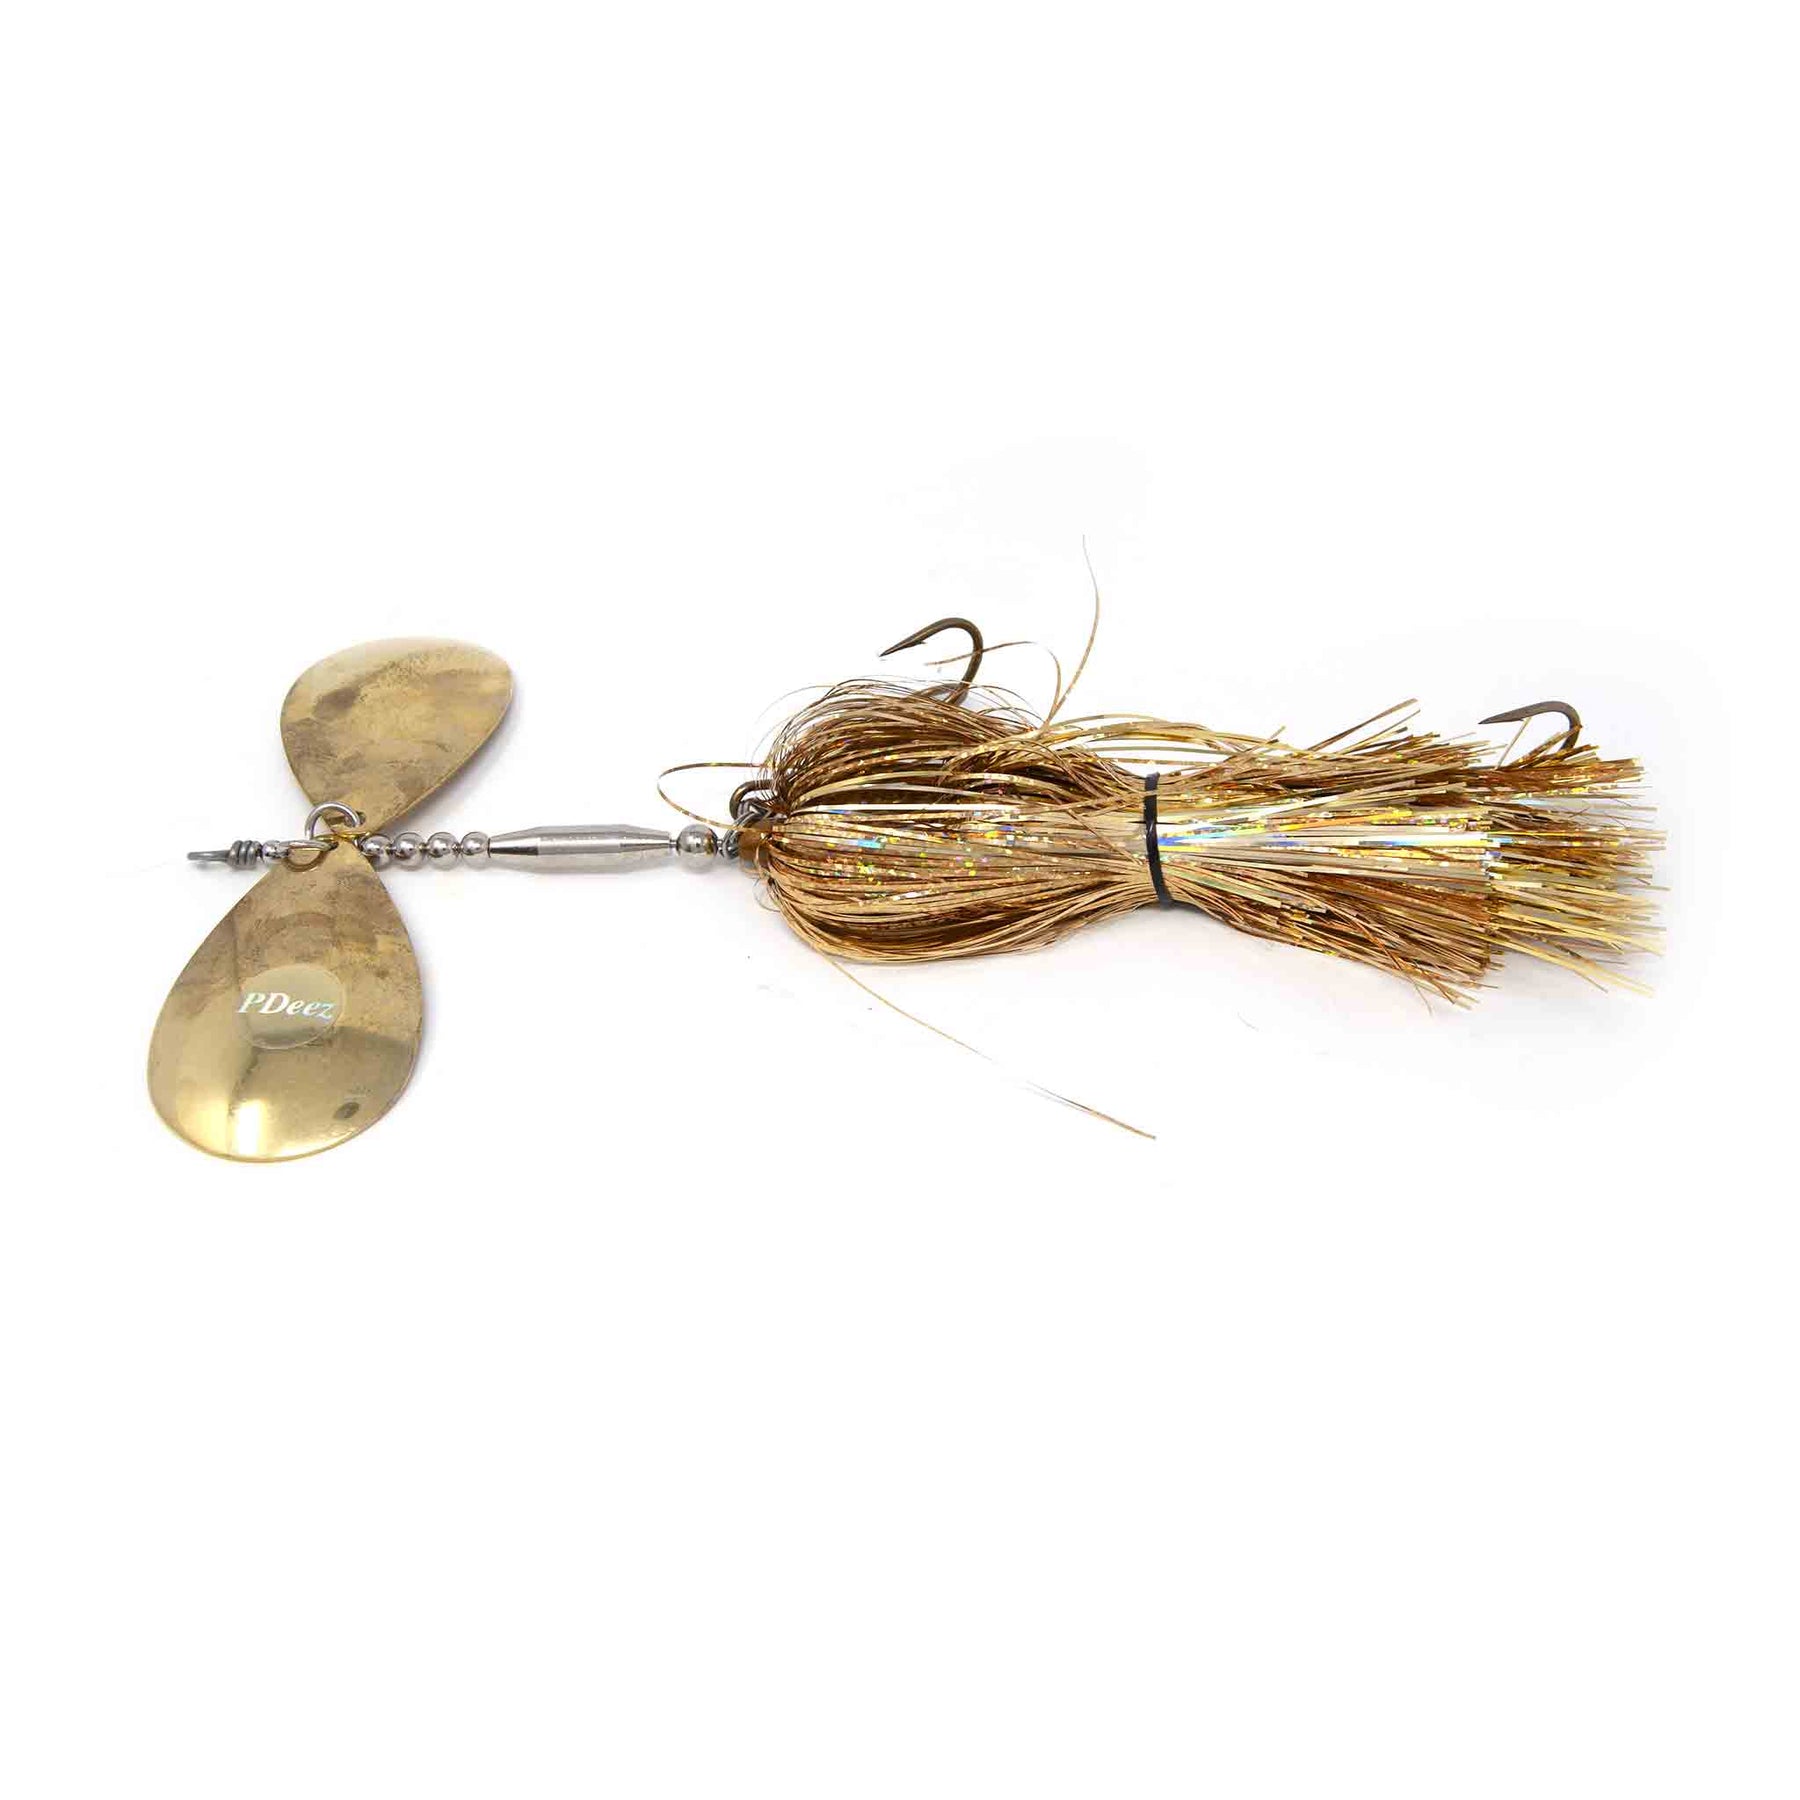 View of Bucktails PDeez Big Tens (10/10) Bucktail Blondie available at EZOKO Pike and Musky Shop